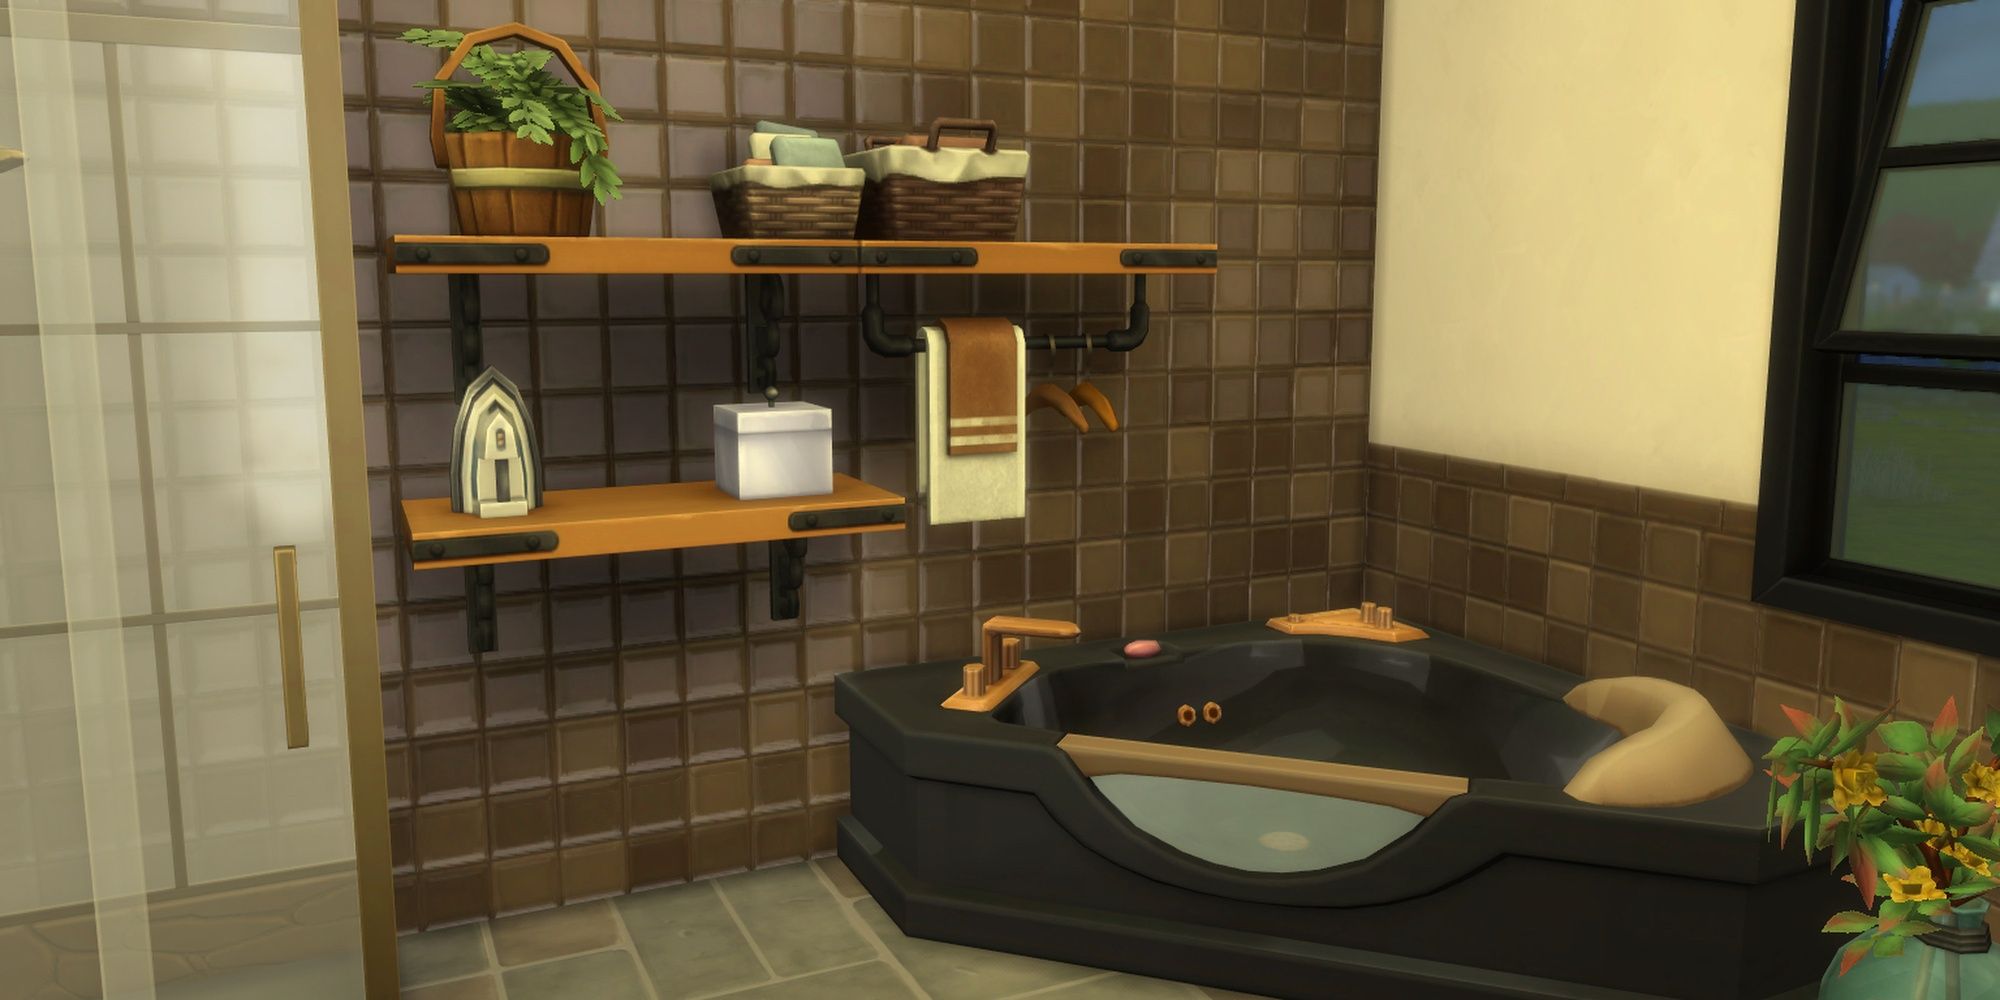 A gold, brown and black Sims 4 bathroom with wooden shelves holding laundry supplies.